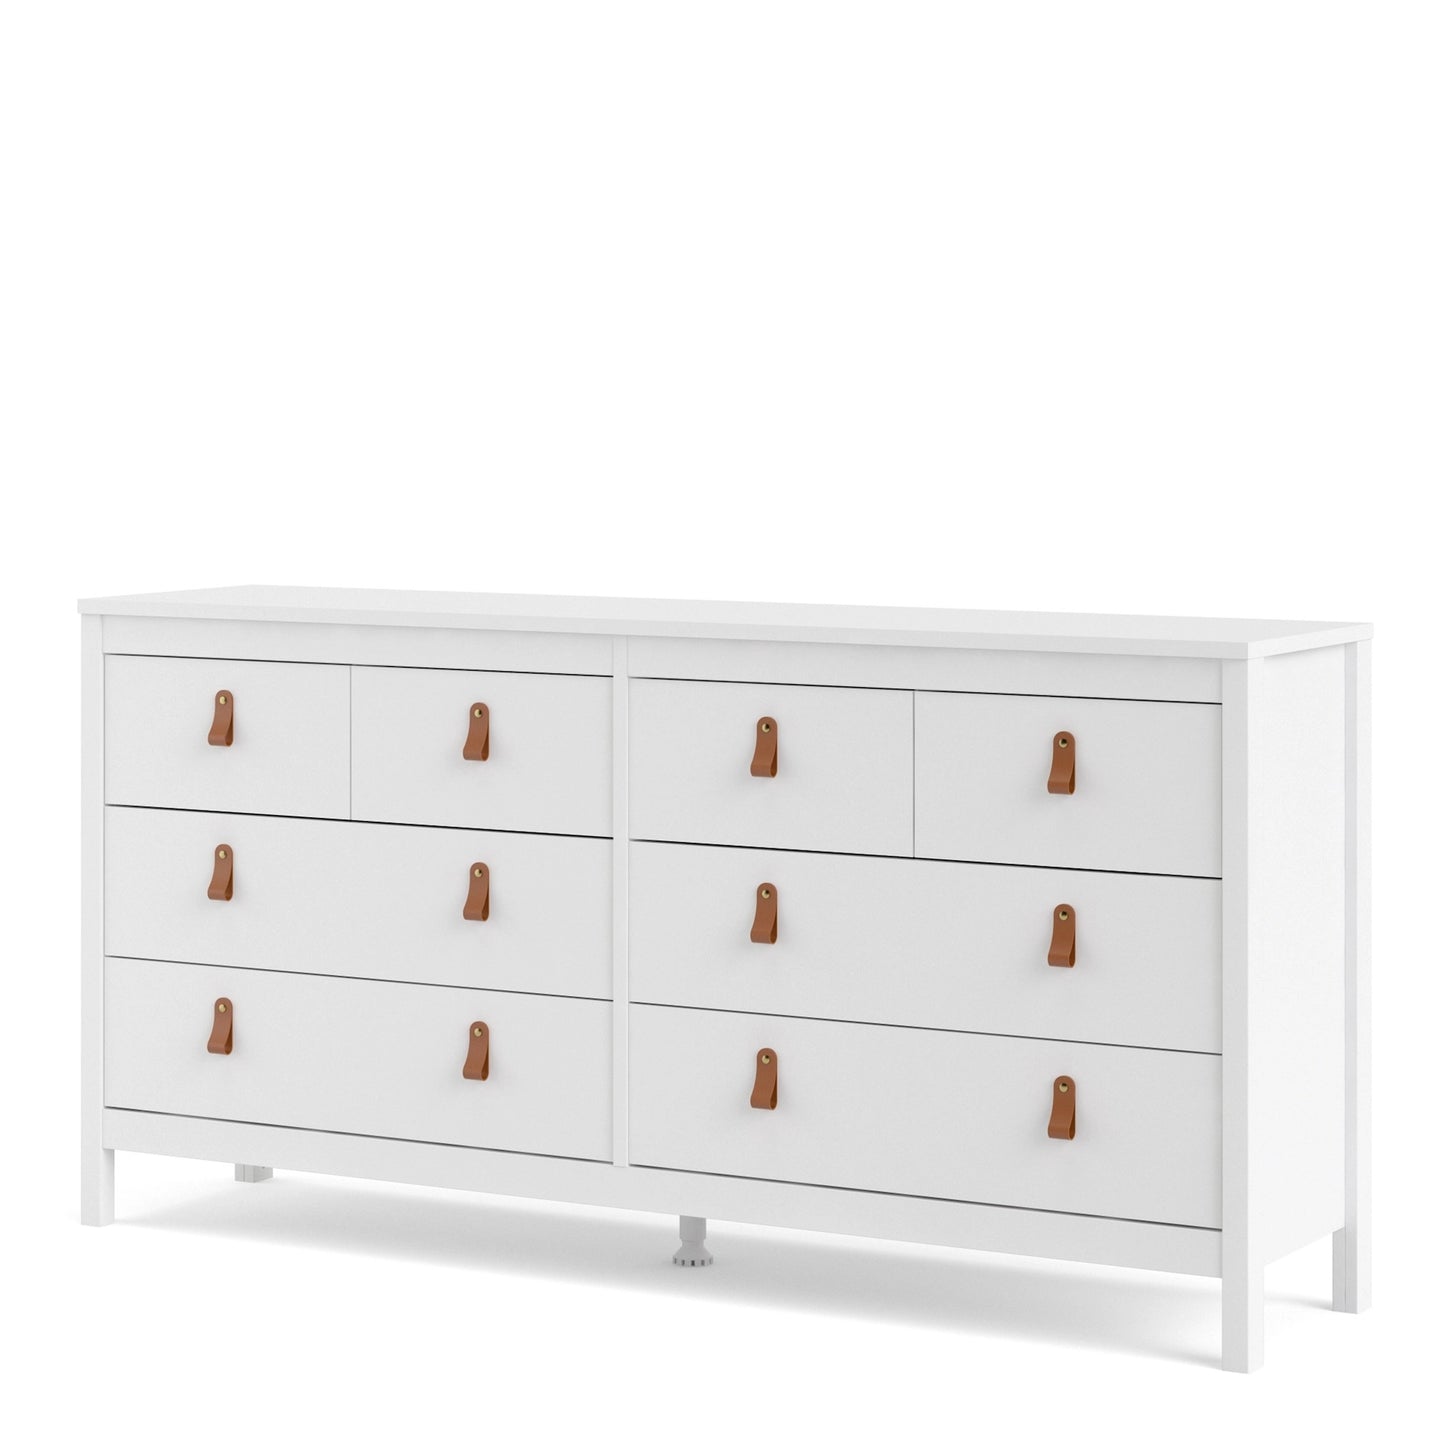 Furniture To Go Barcelona Double Dresser 4+4 Drawers in White